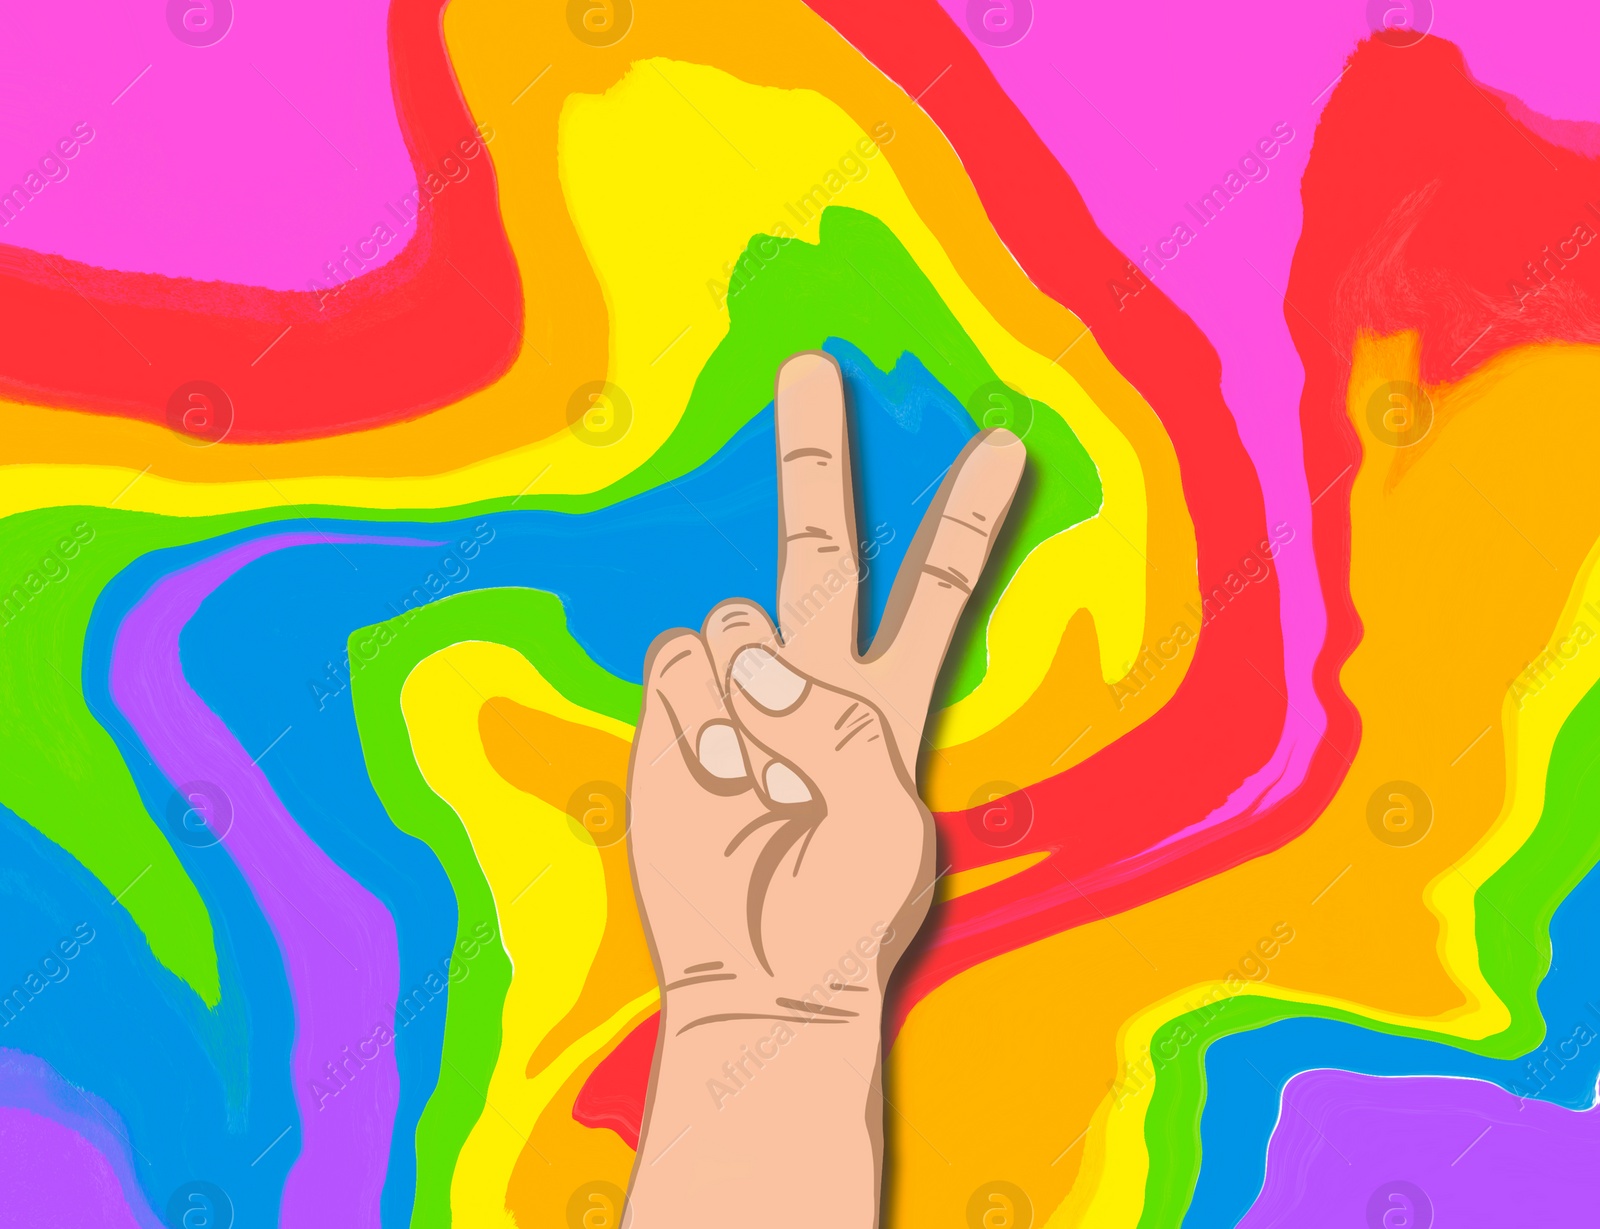 Illustration of Person showing peace gesture against background in colors of pride flag, illustration